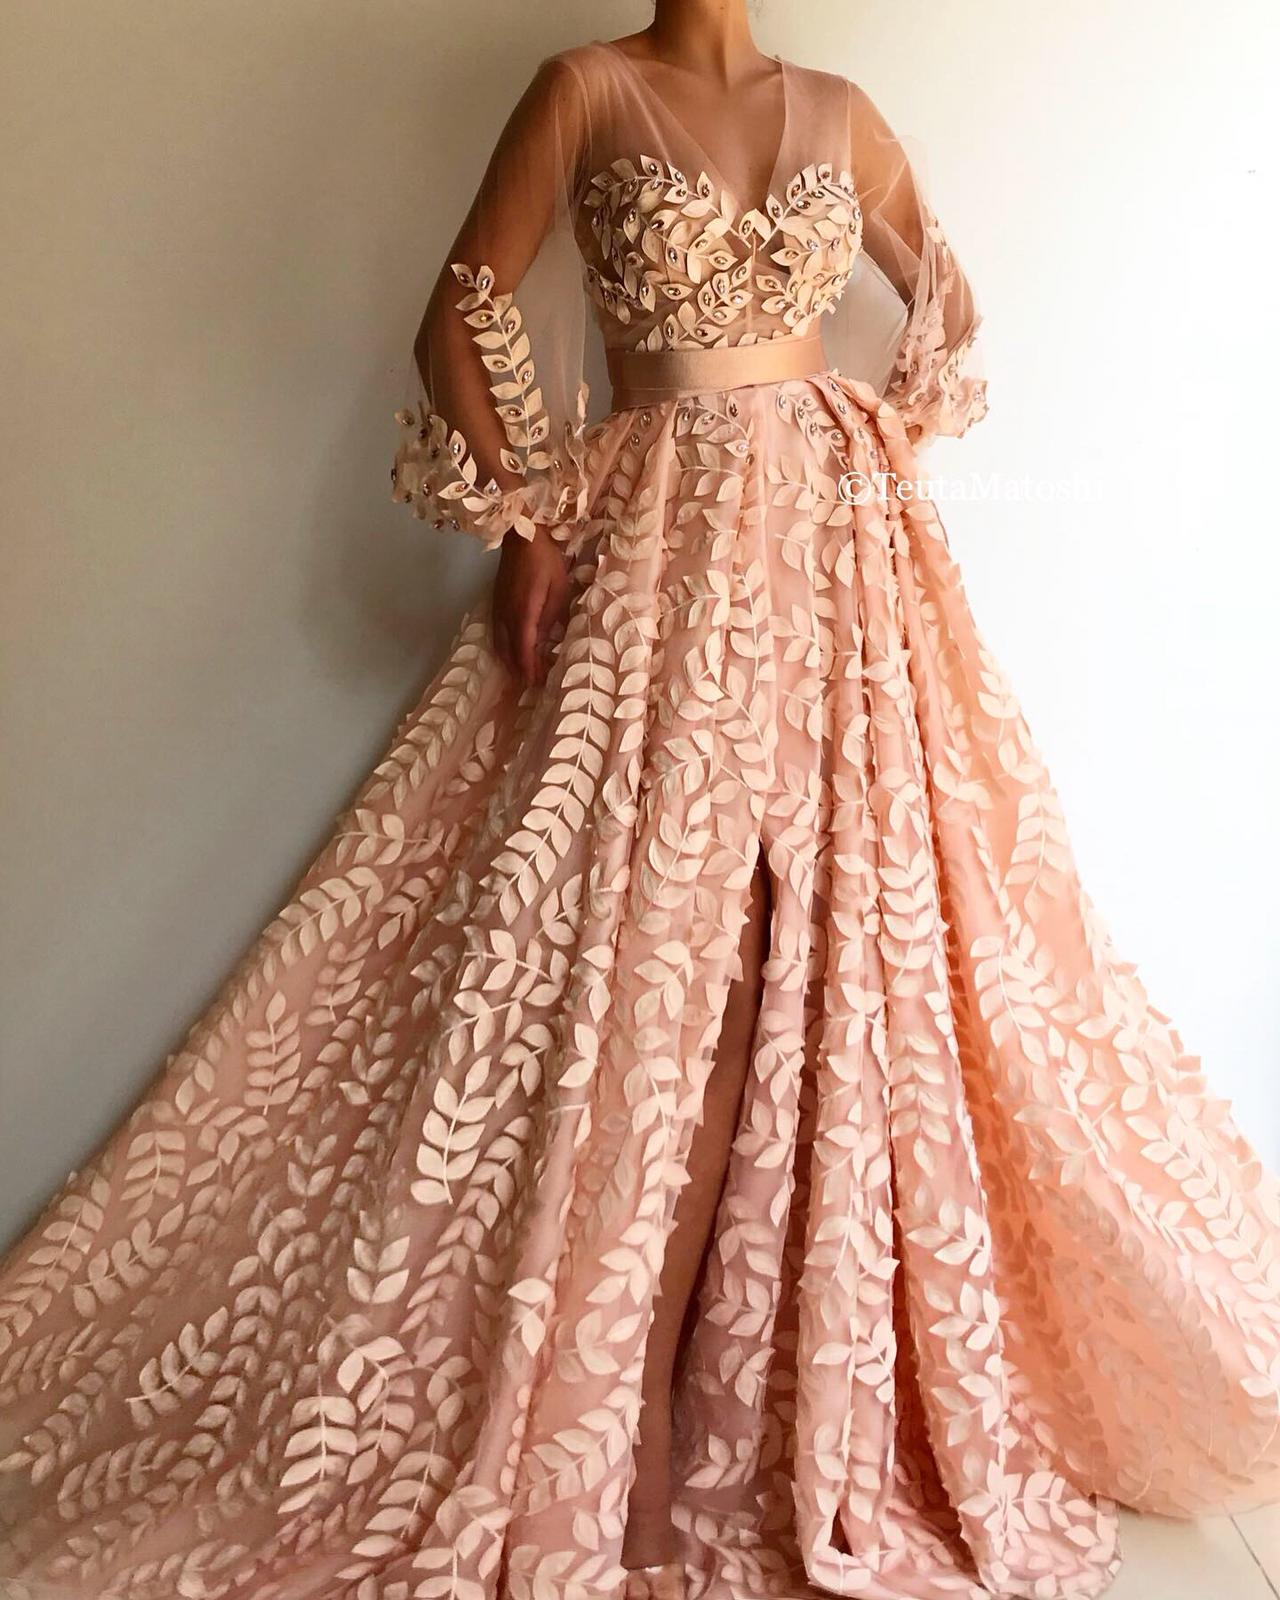 Peach A-Line dress with long sleeves and lace